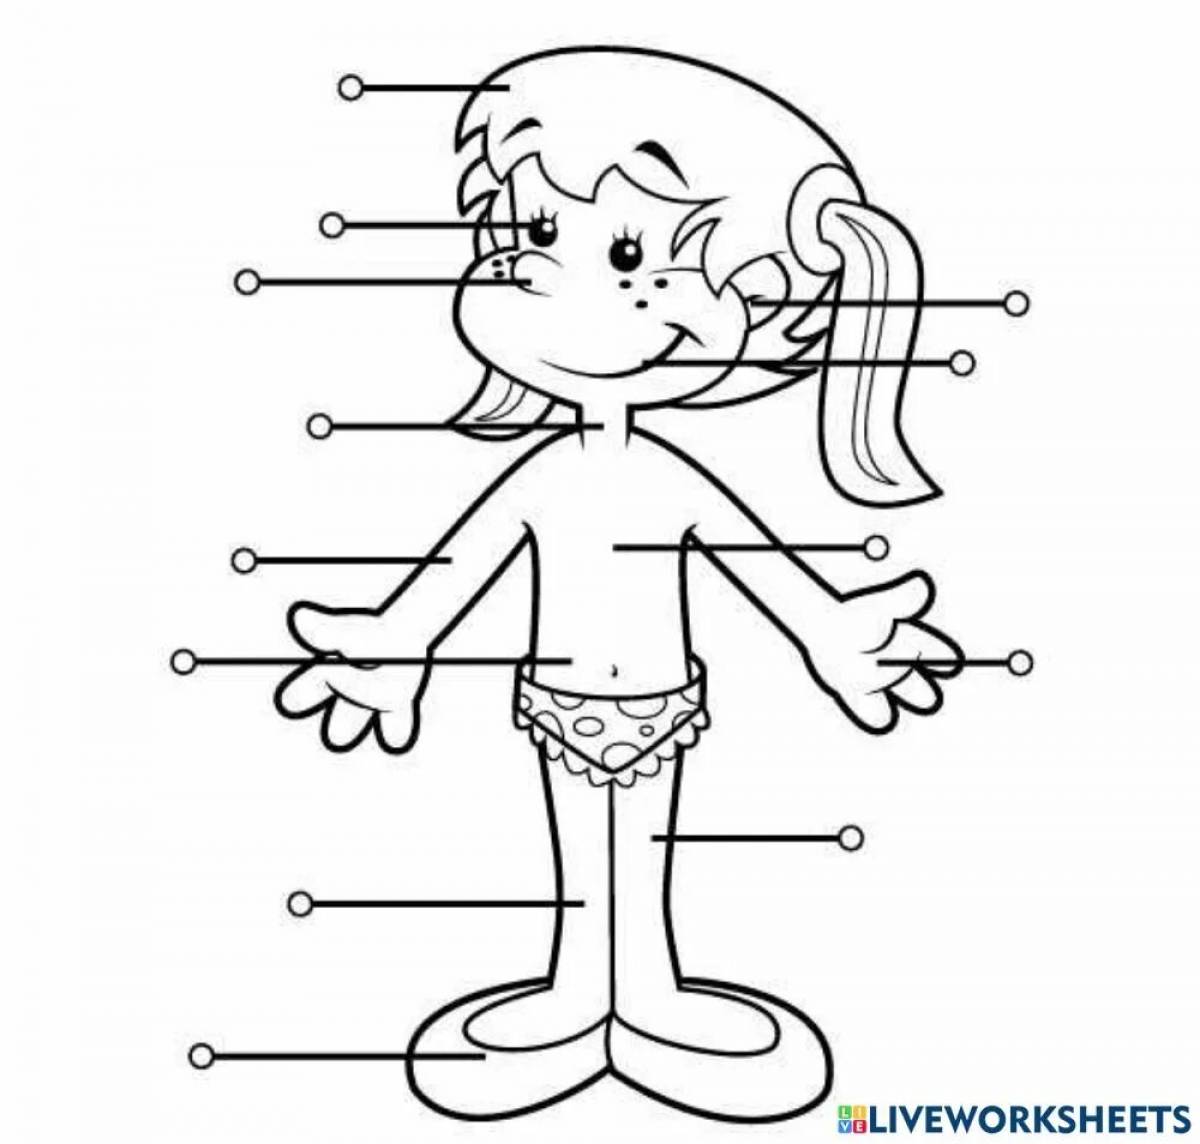 Human body structure for kids #7